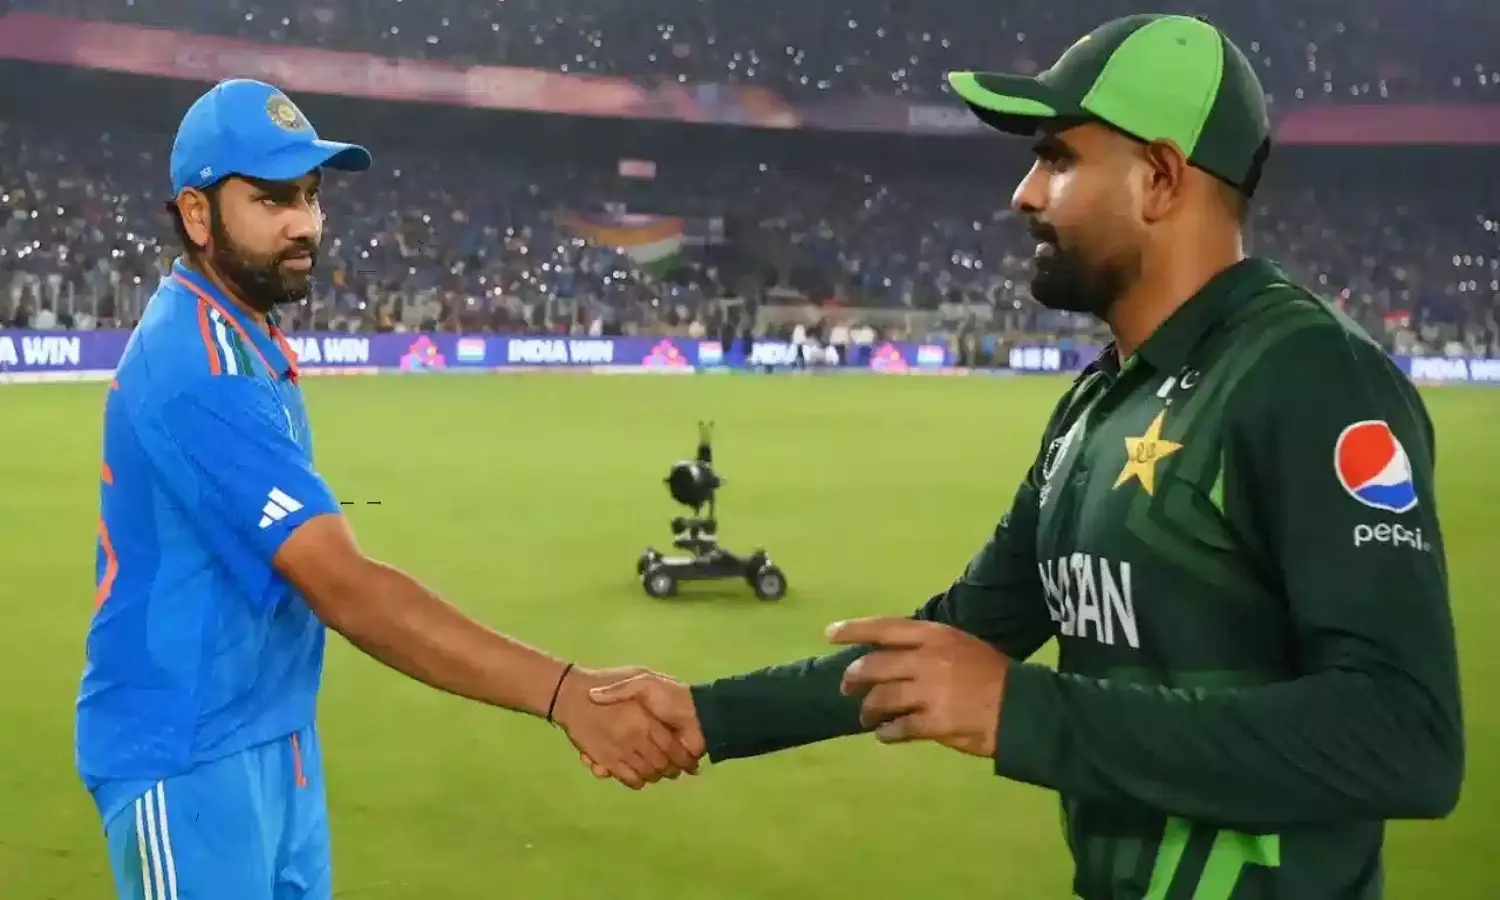 T20 match between India and Pakistan